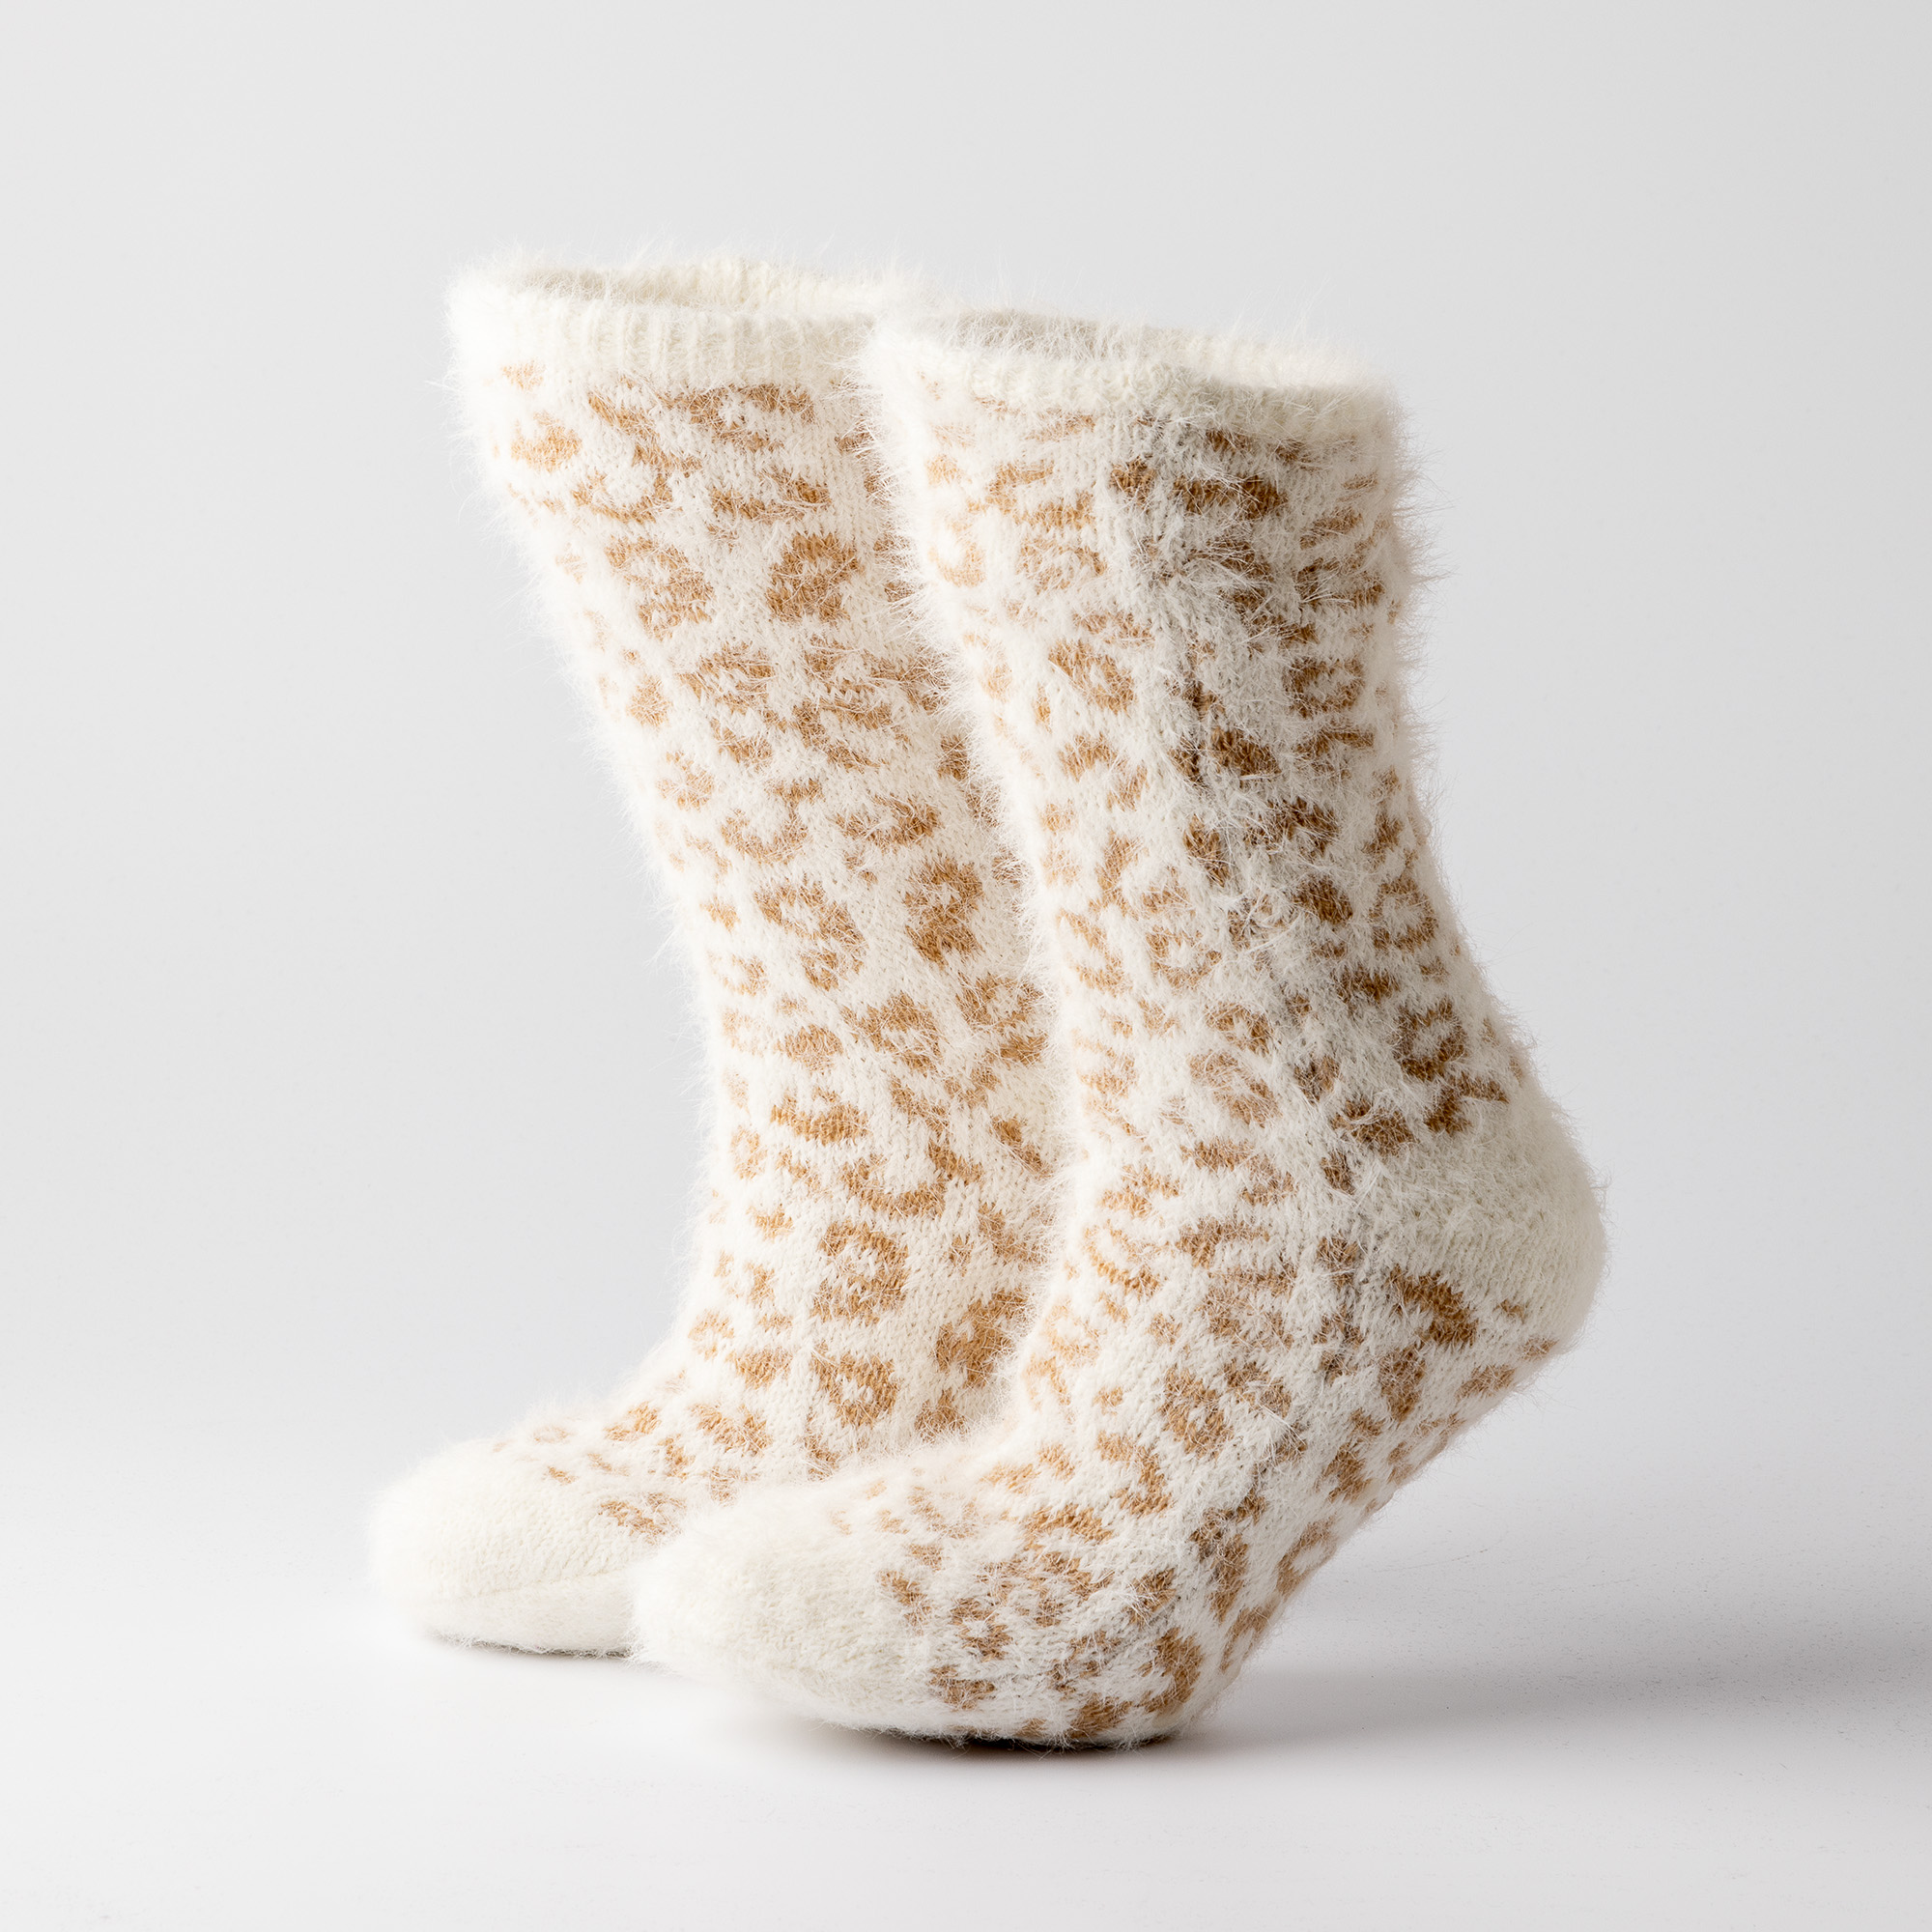 LEO - House socks - non-slip - with sherpa lining - one size - Pumice Stone - beige